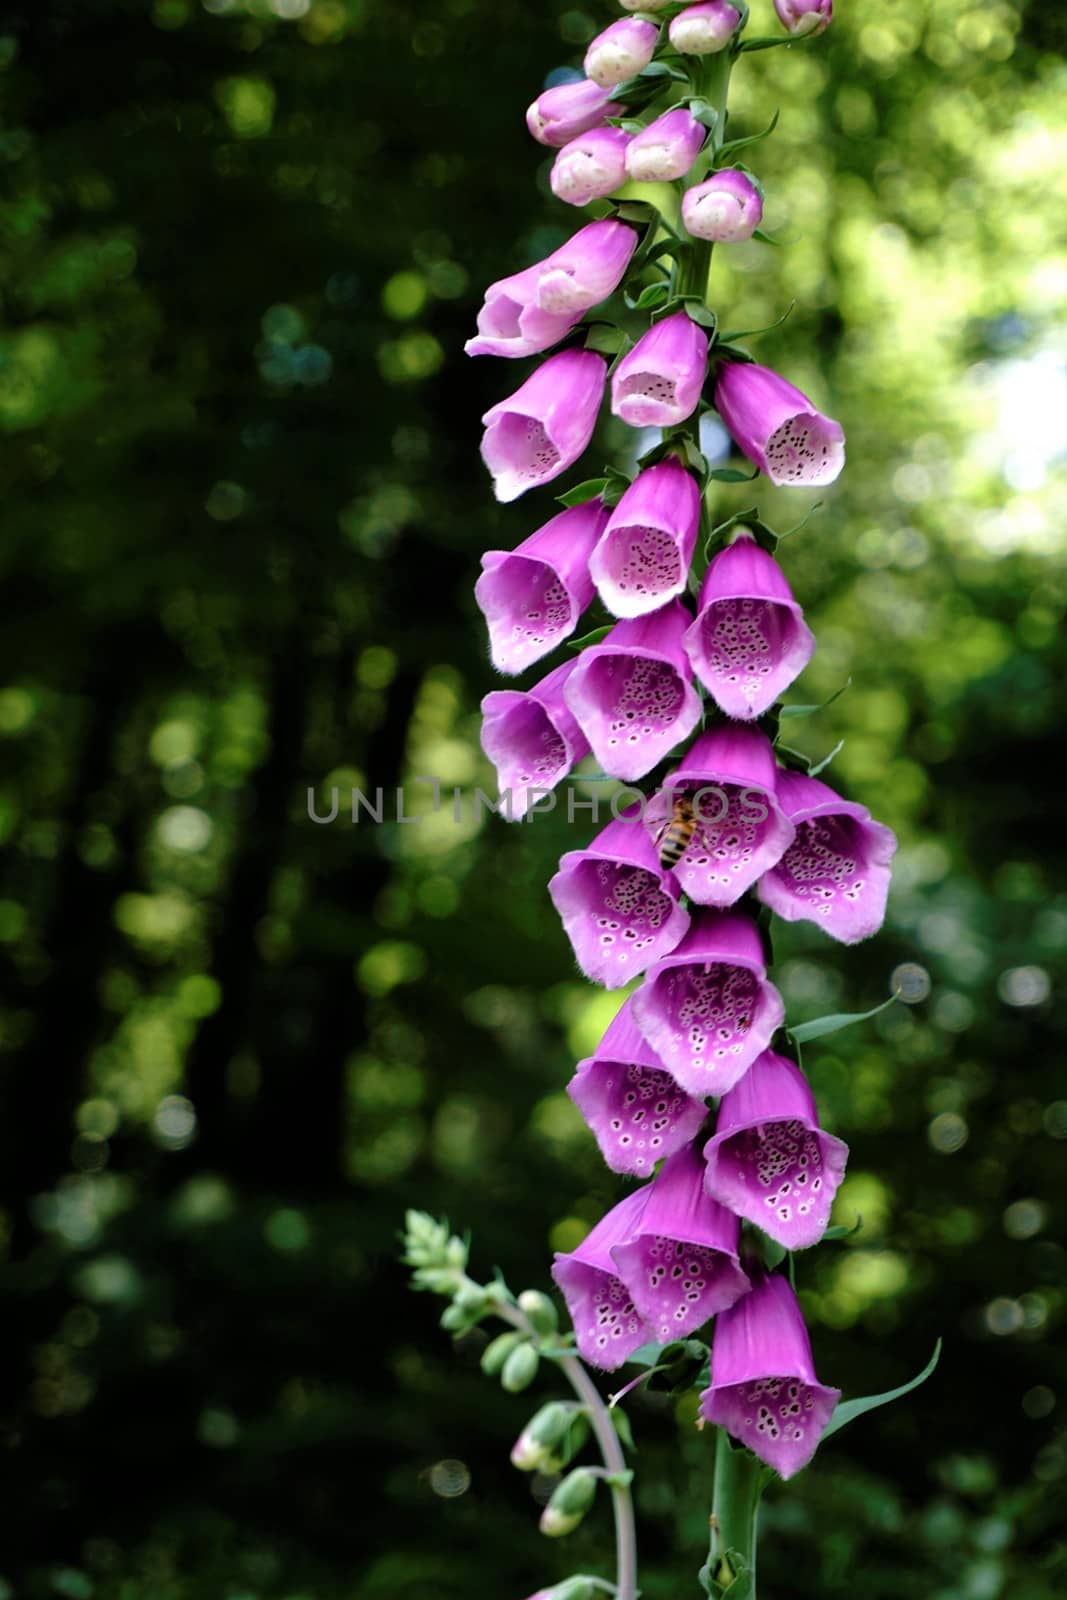 Common foxglove, digitalis purpurea, blooming in forest by pisces2386